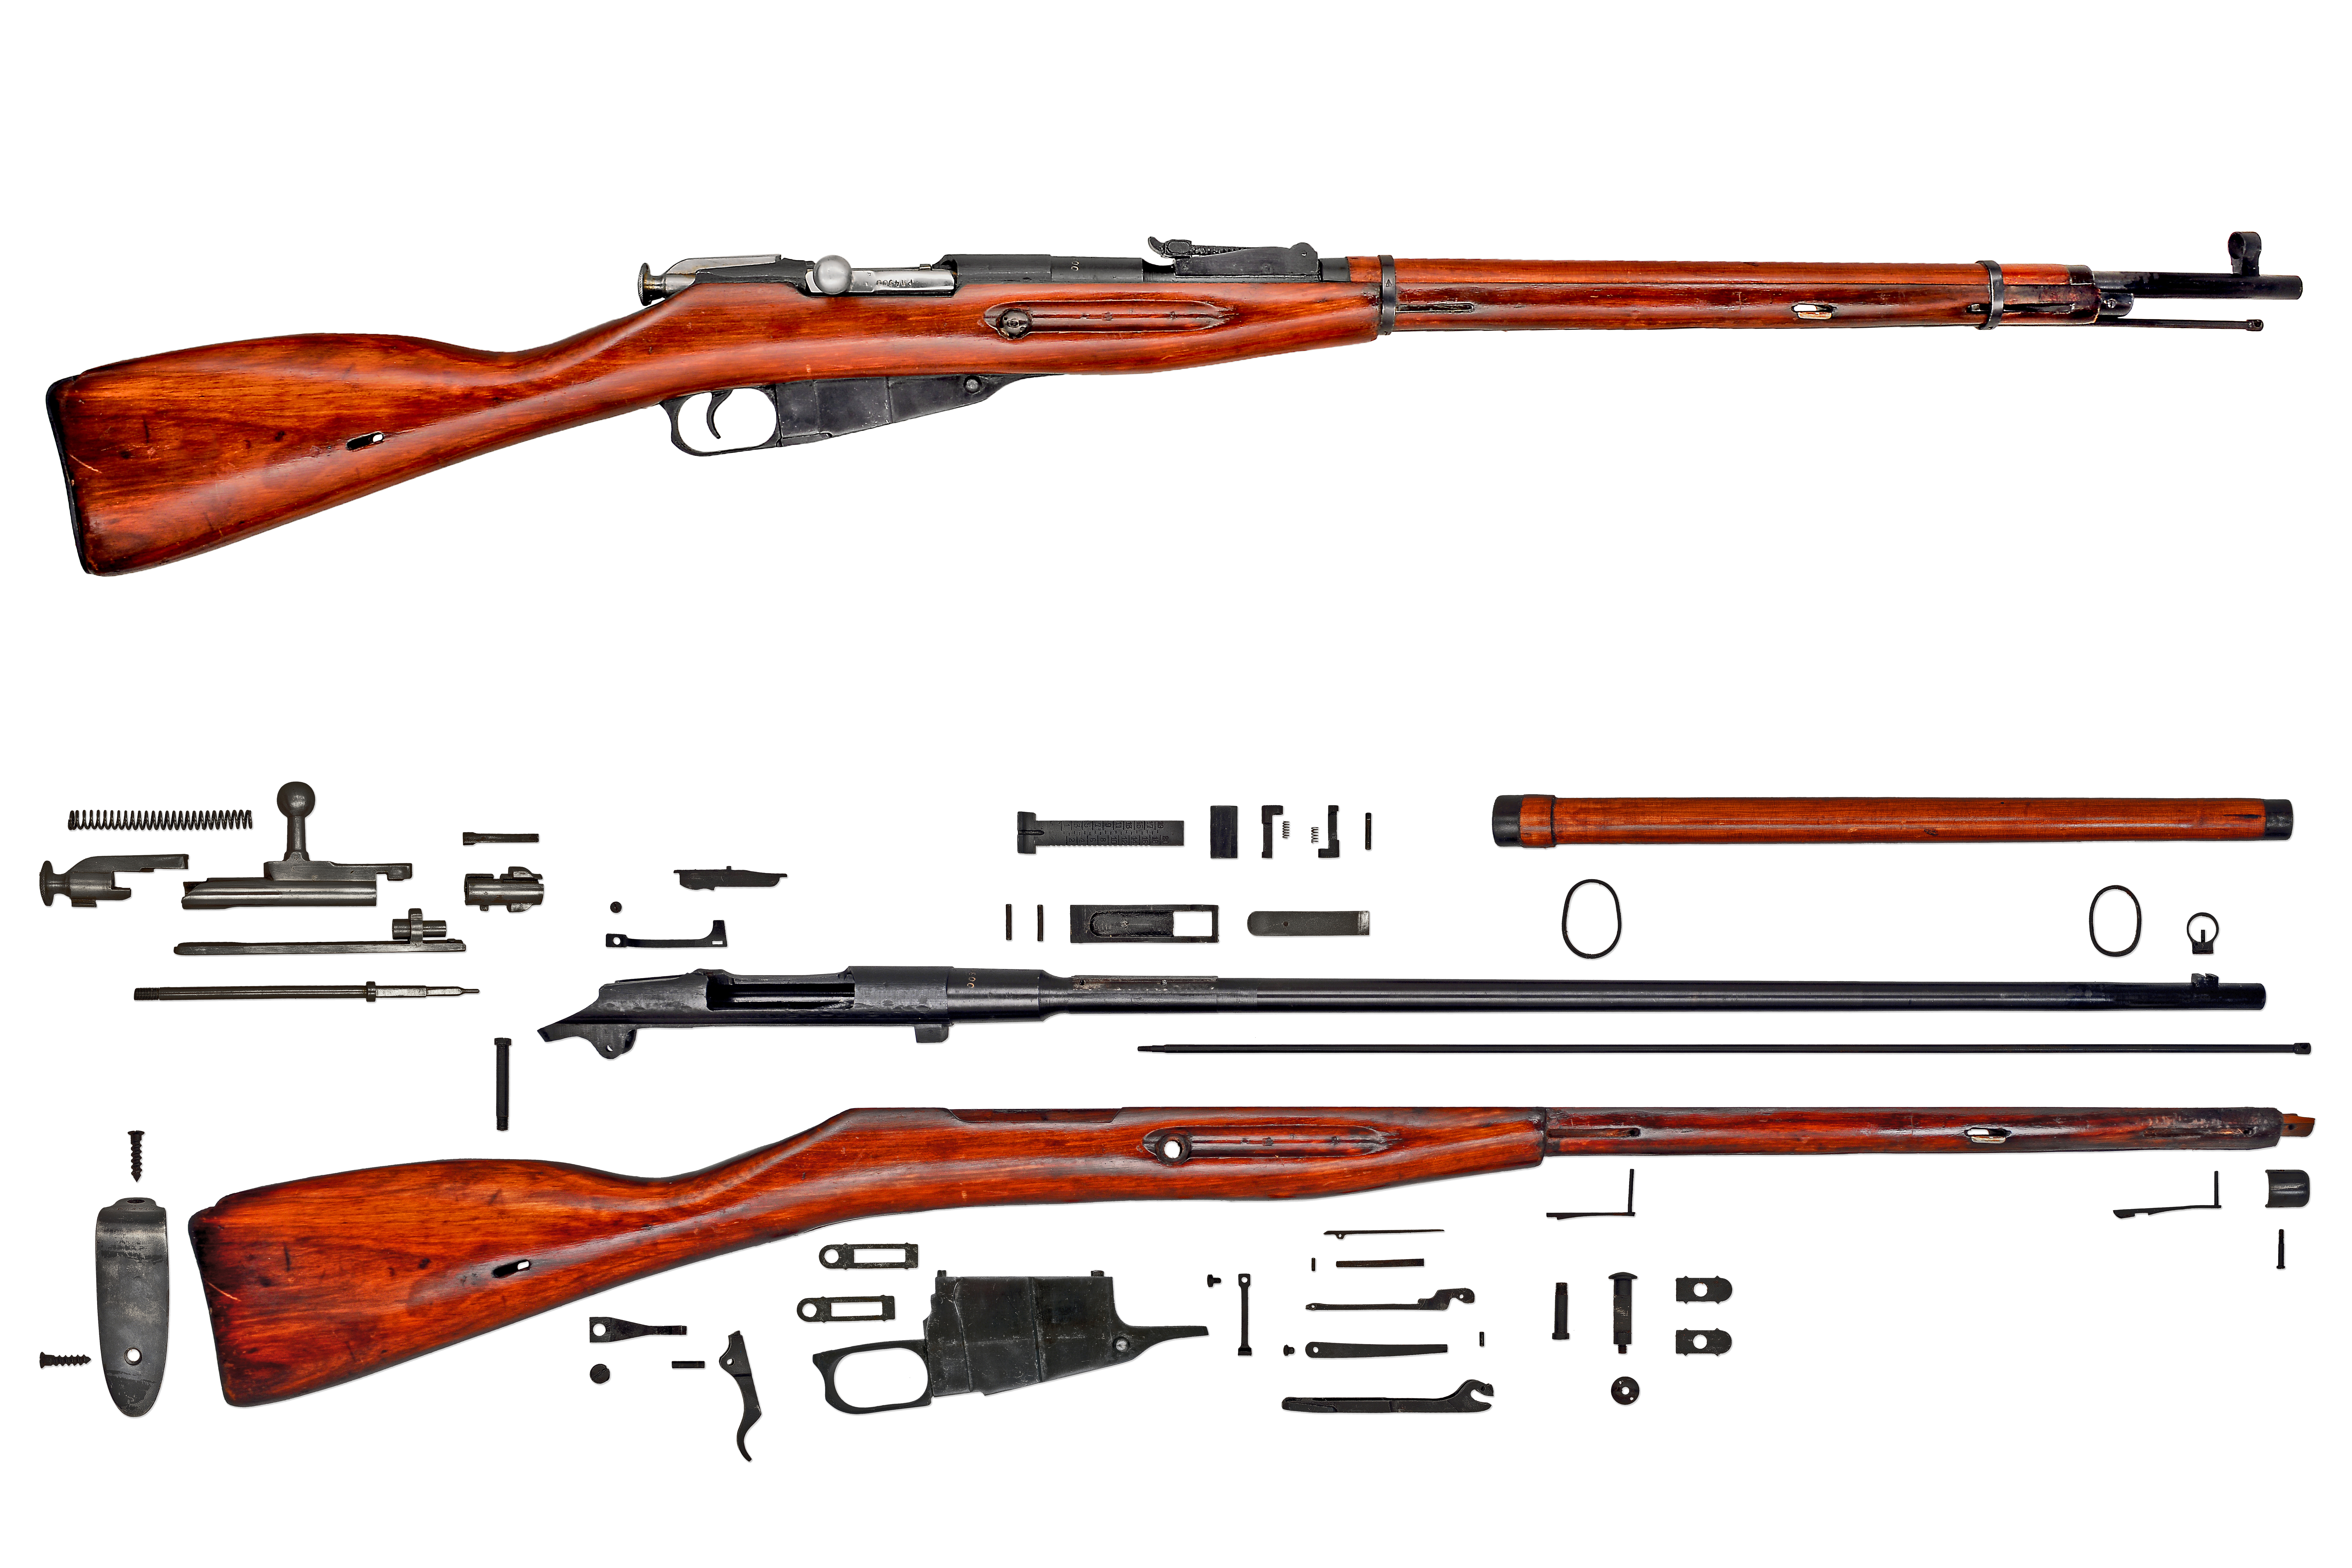 Mosin Nagant M91 Rifle Pics, Weapons Collection